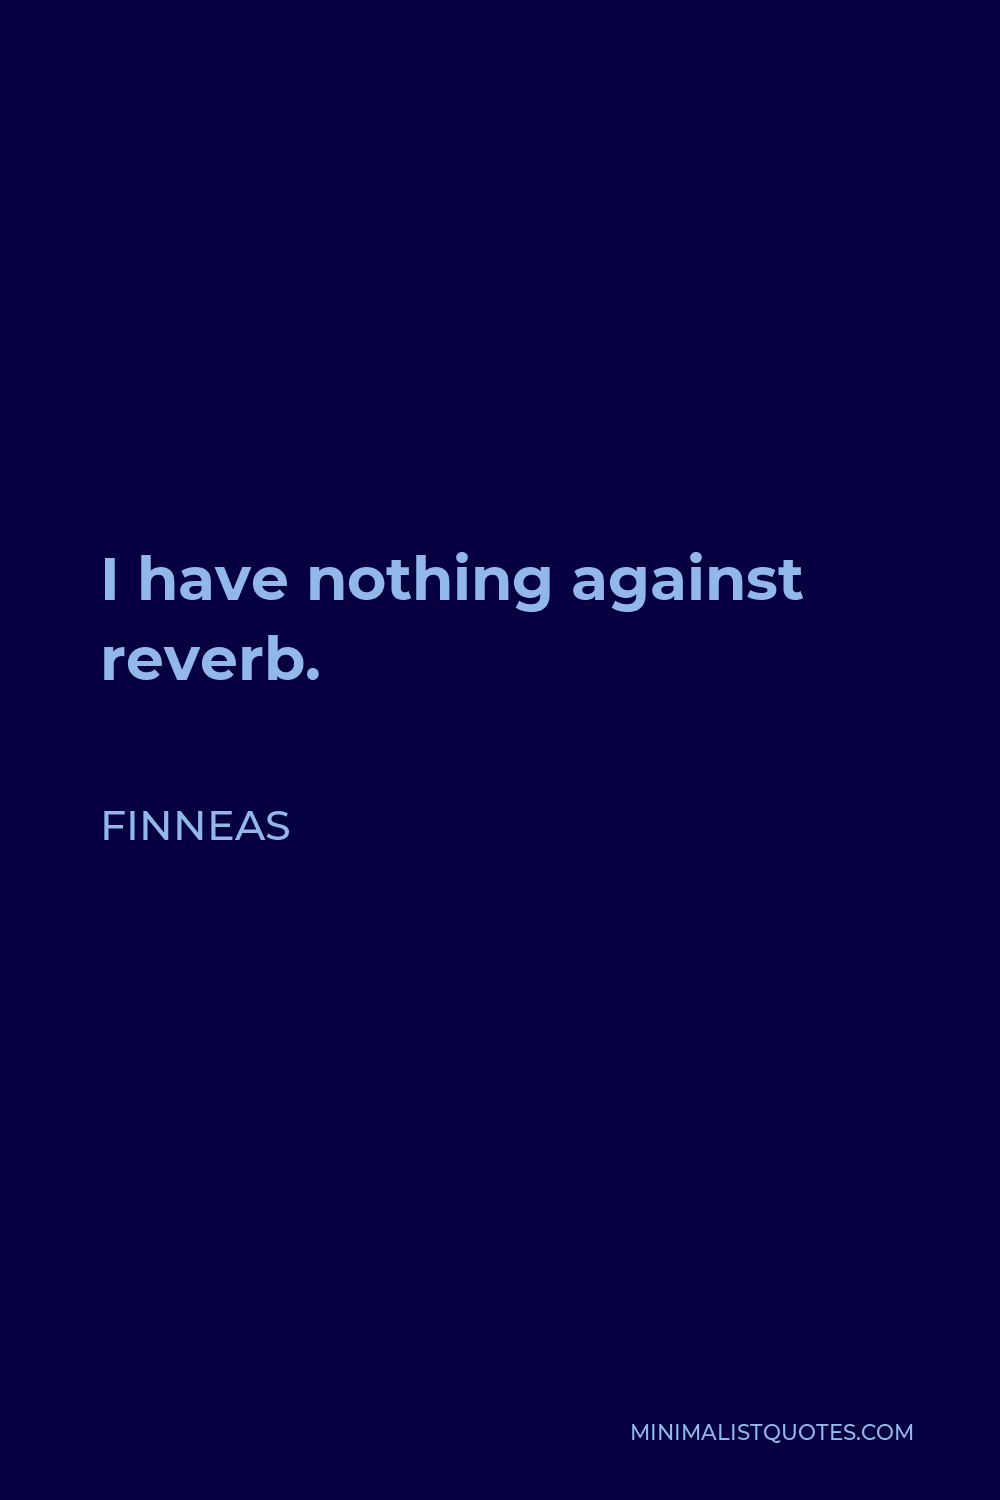 Finneas Quote - I have nothing against reverb.